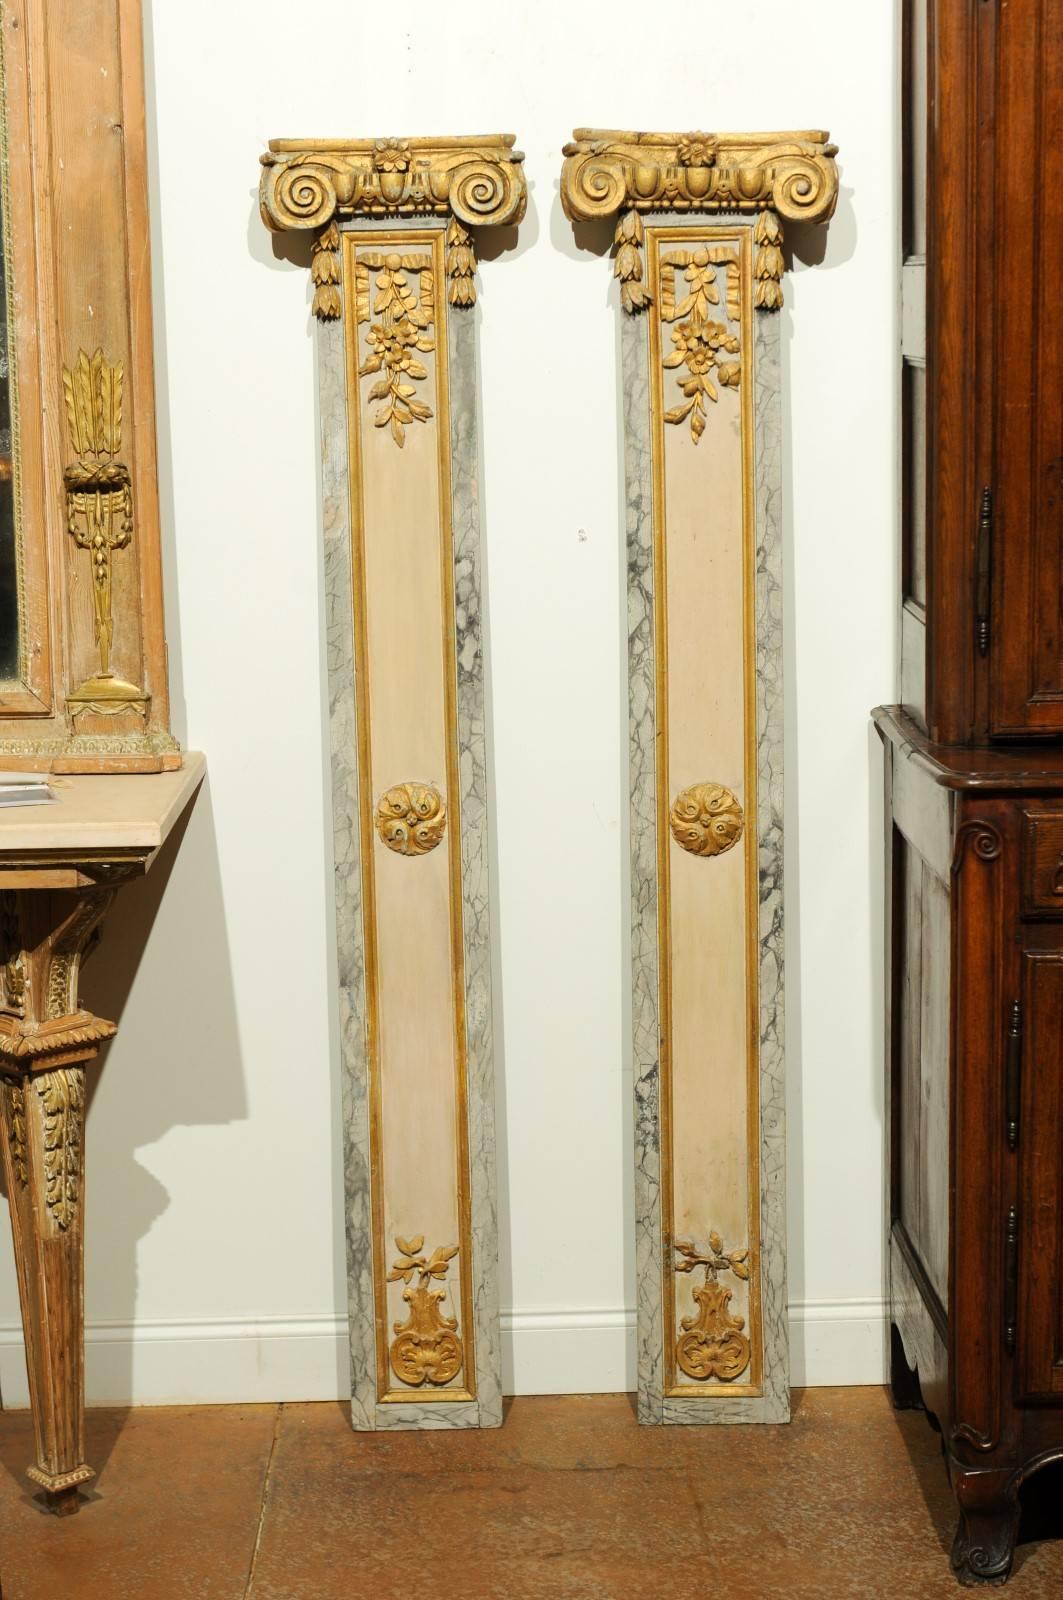 A pair of French 18th century Louis XVI decorative pilasters with Ionic style capitals, giltwood accents and faux marble borders. Each of this pair of French decorative pilasters features an eye-catching gilded Ionic capital, sitting above a linear